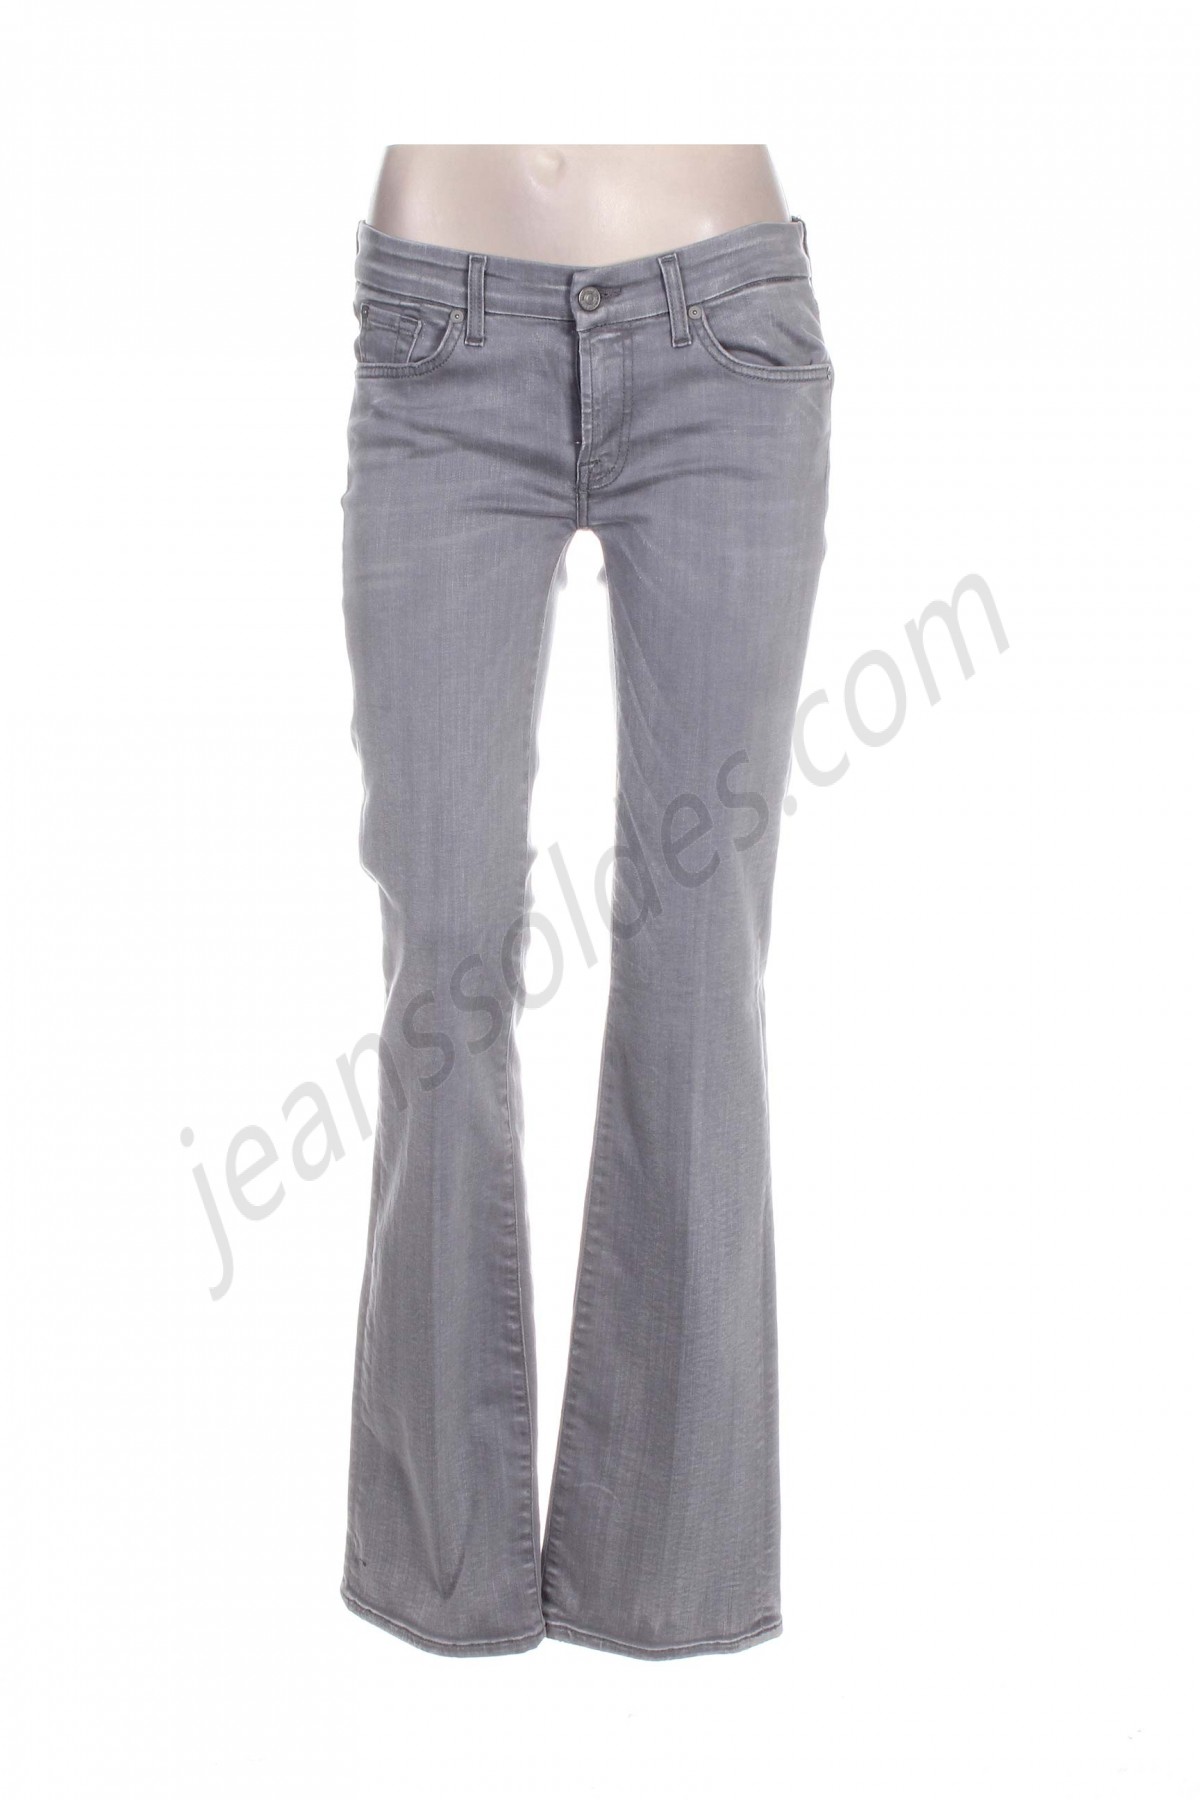 for all mankind-Jeans coupe droite prix d’amis - -0